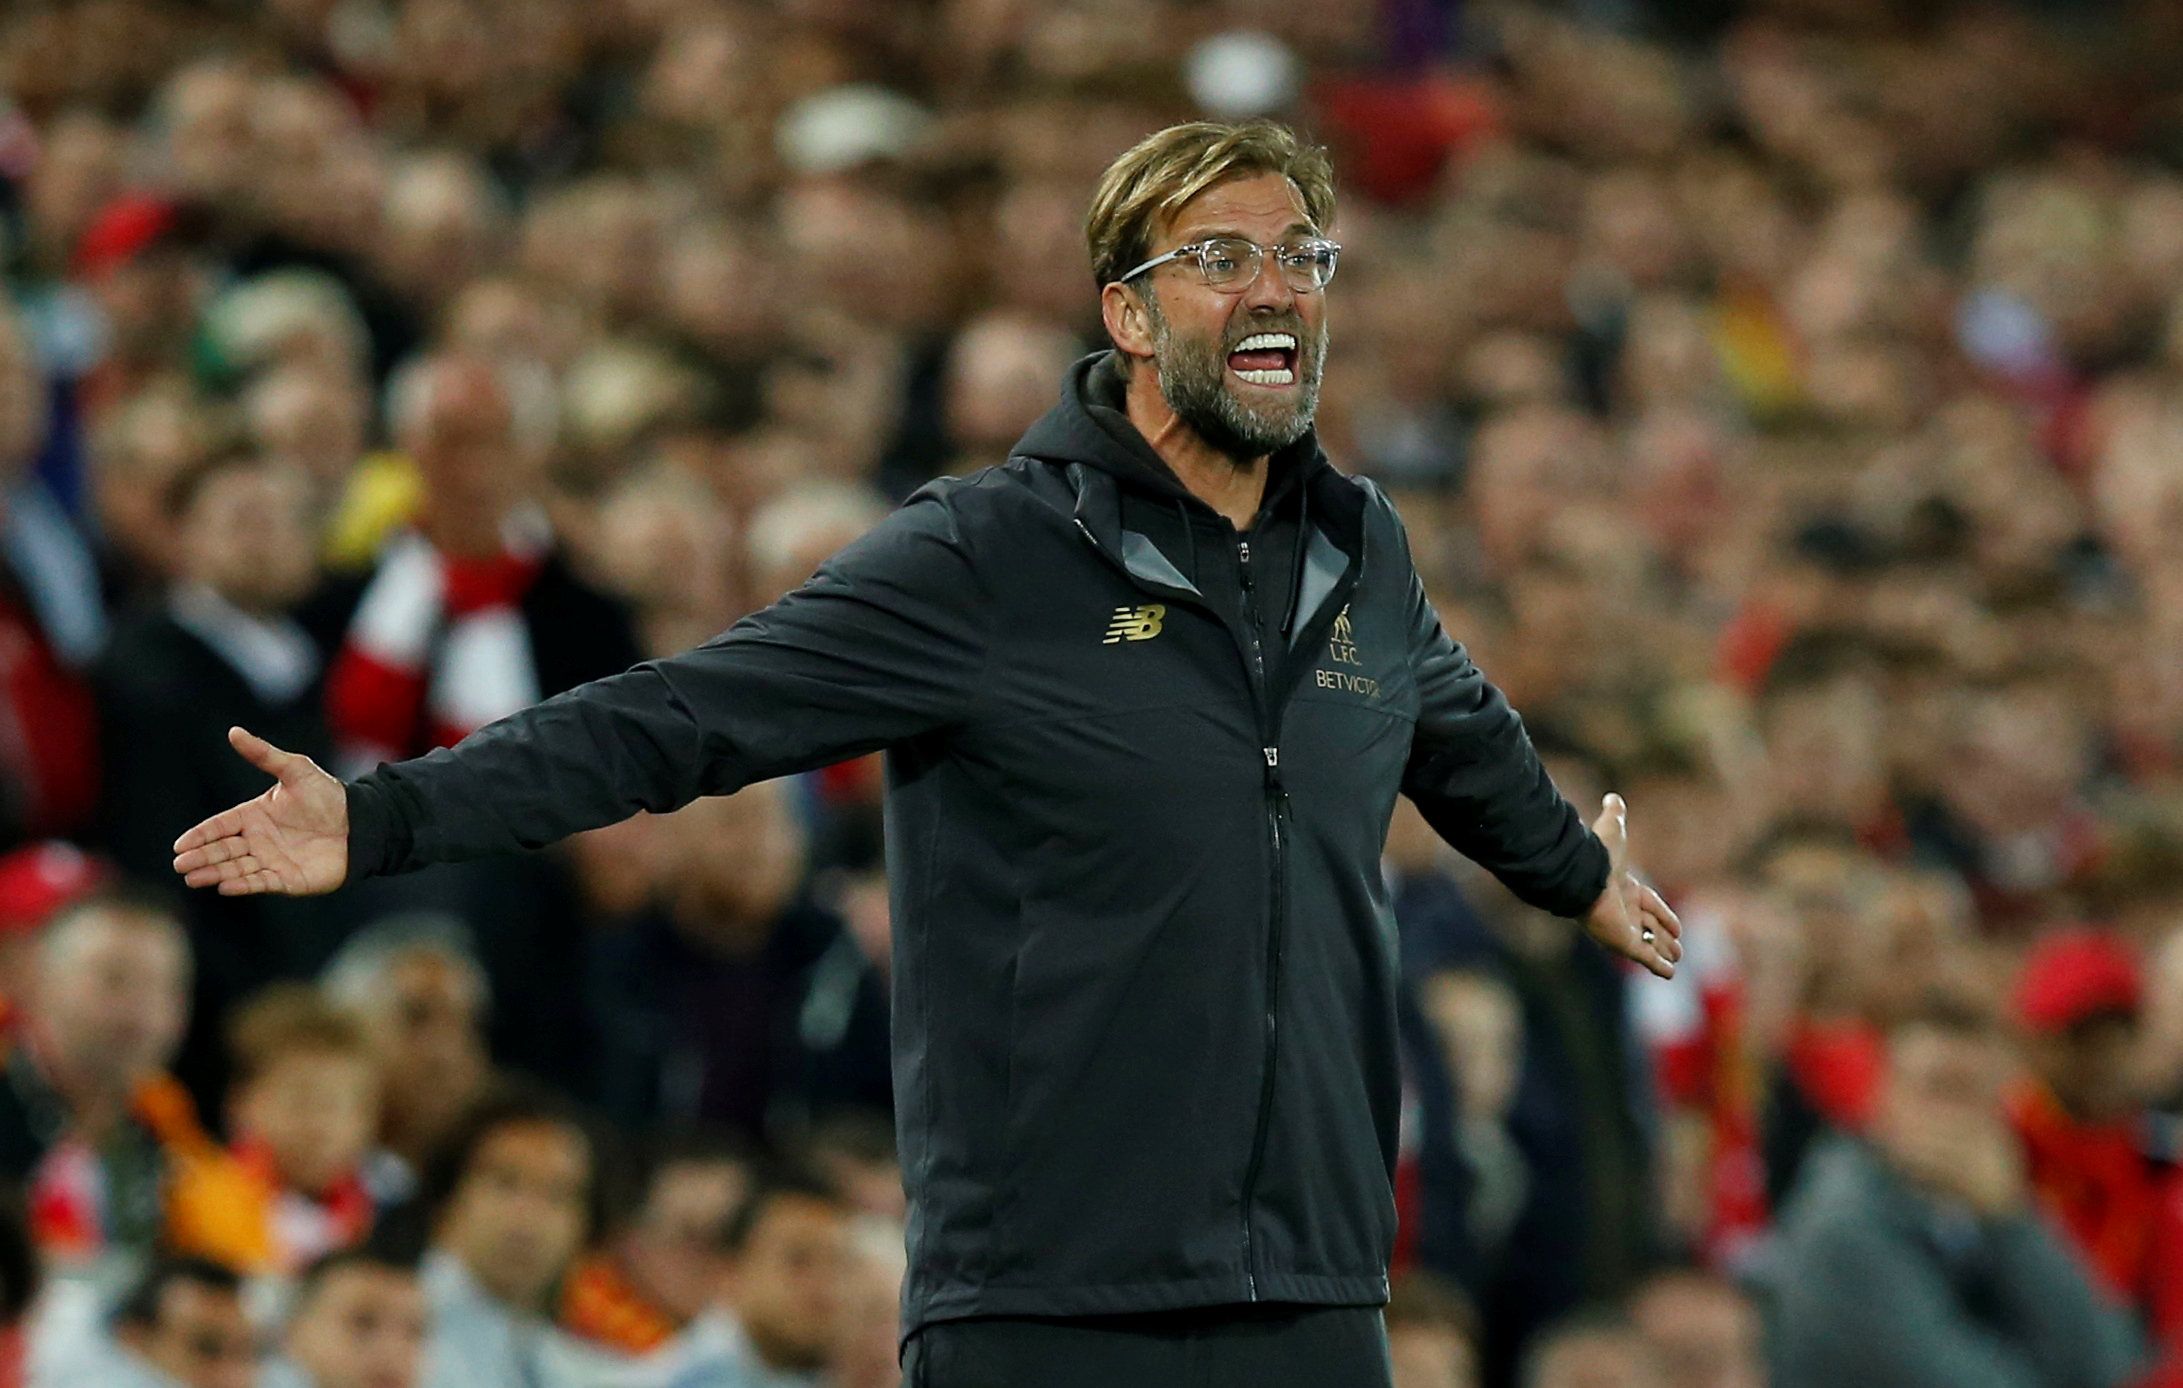 Soccer Football - Carabao Cup - Third Round - Liverpool v Chelsea - Anfield, Liverpool, Britain - September 26, 2018  Liverpool manager Juergen Klopp reacts during the match   REUTERS/Andrew Yates  EDITORIAL USE ONLY. No use with unauthorized audio, video, data, fixture lists, club/league logos or 